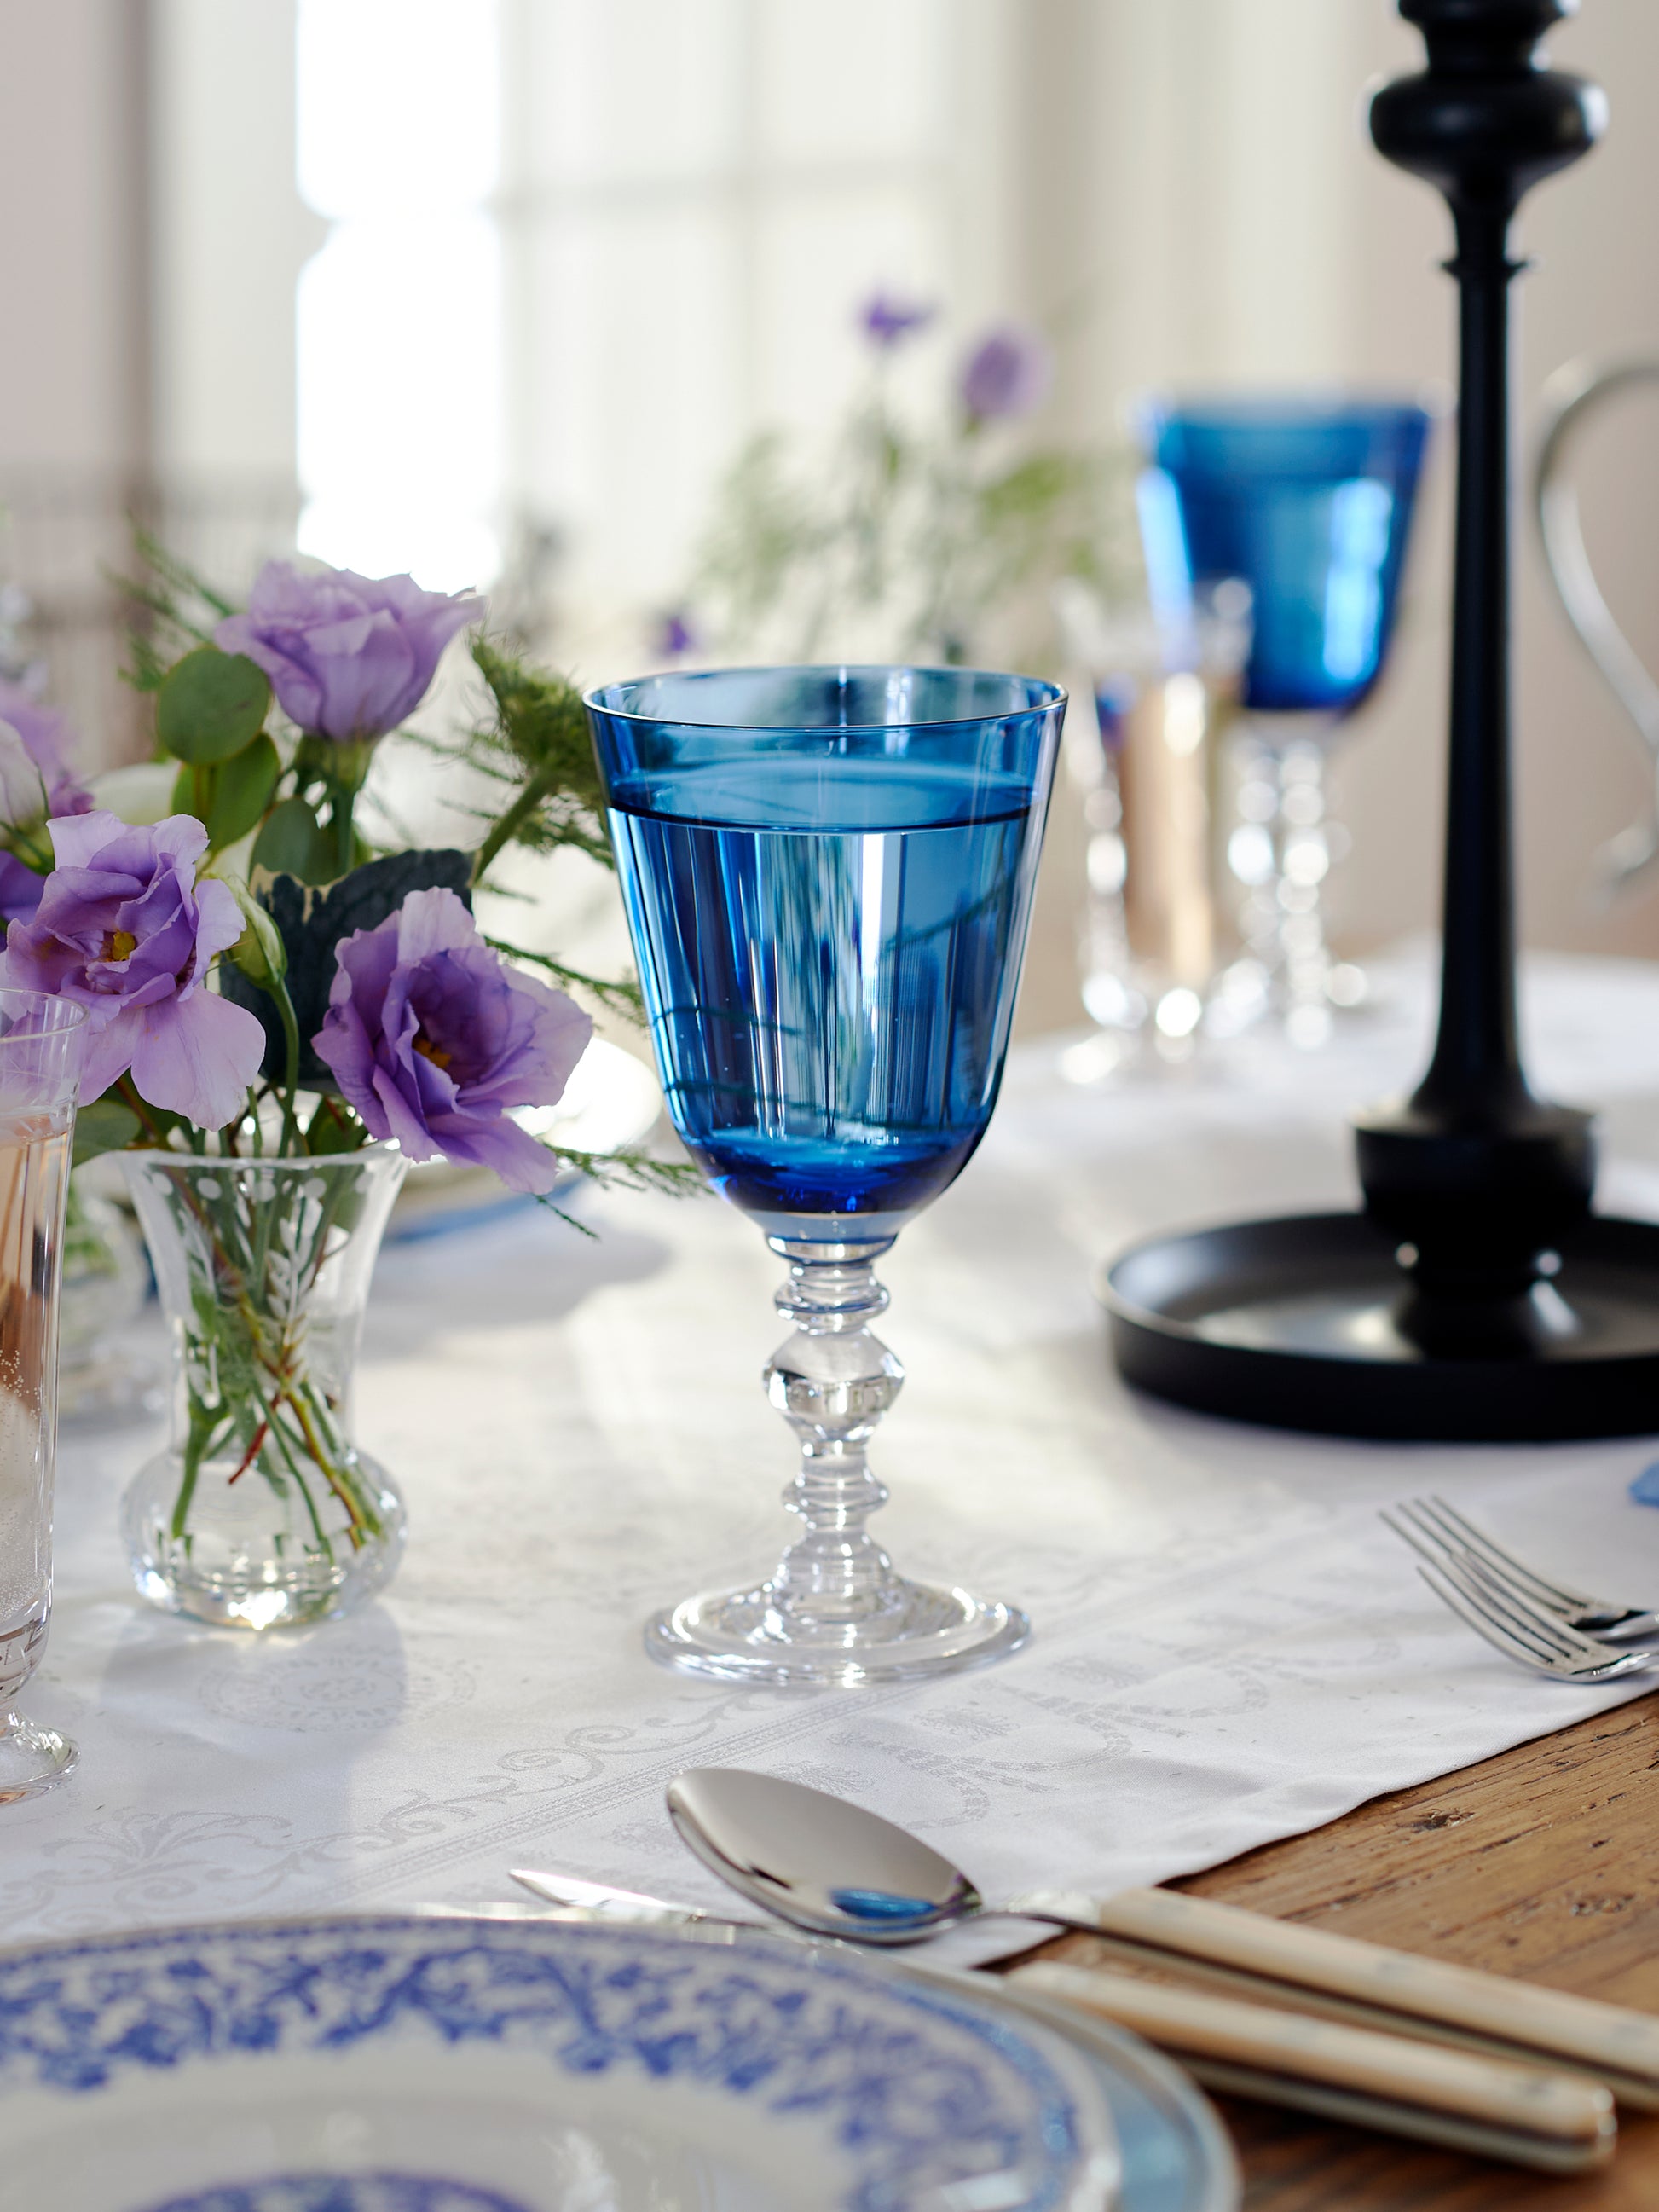 Shop the Crystal Cocktail Glasses with Stars at Weston Table